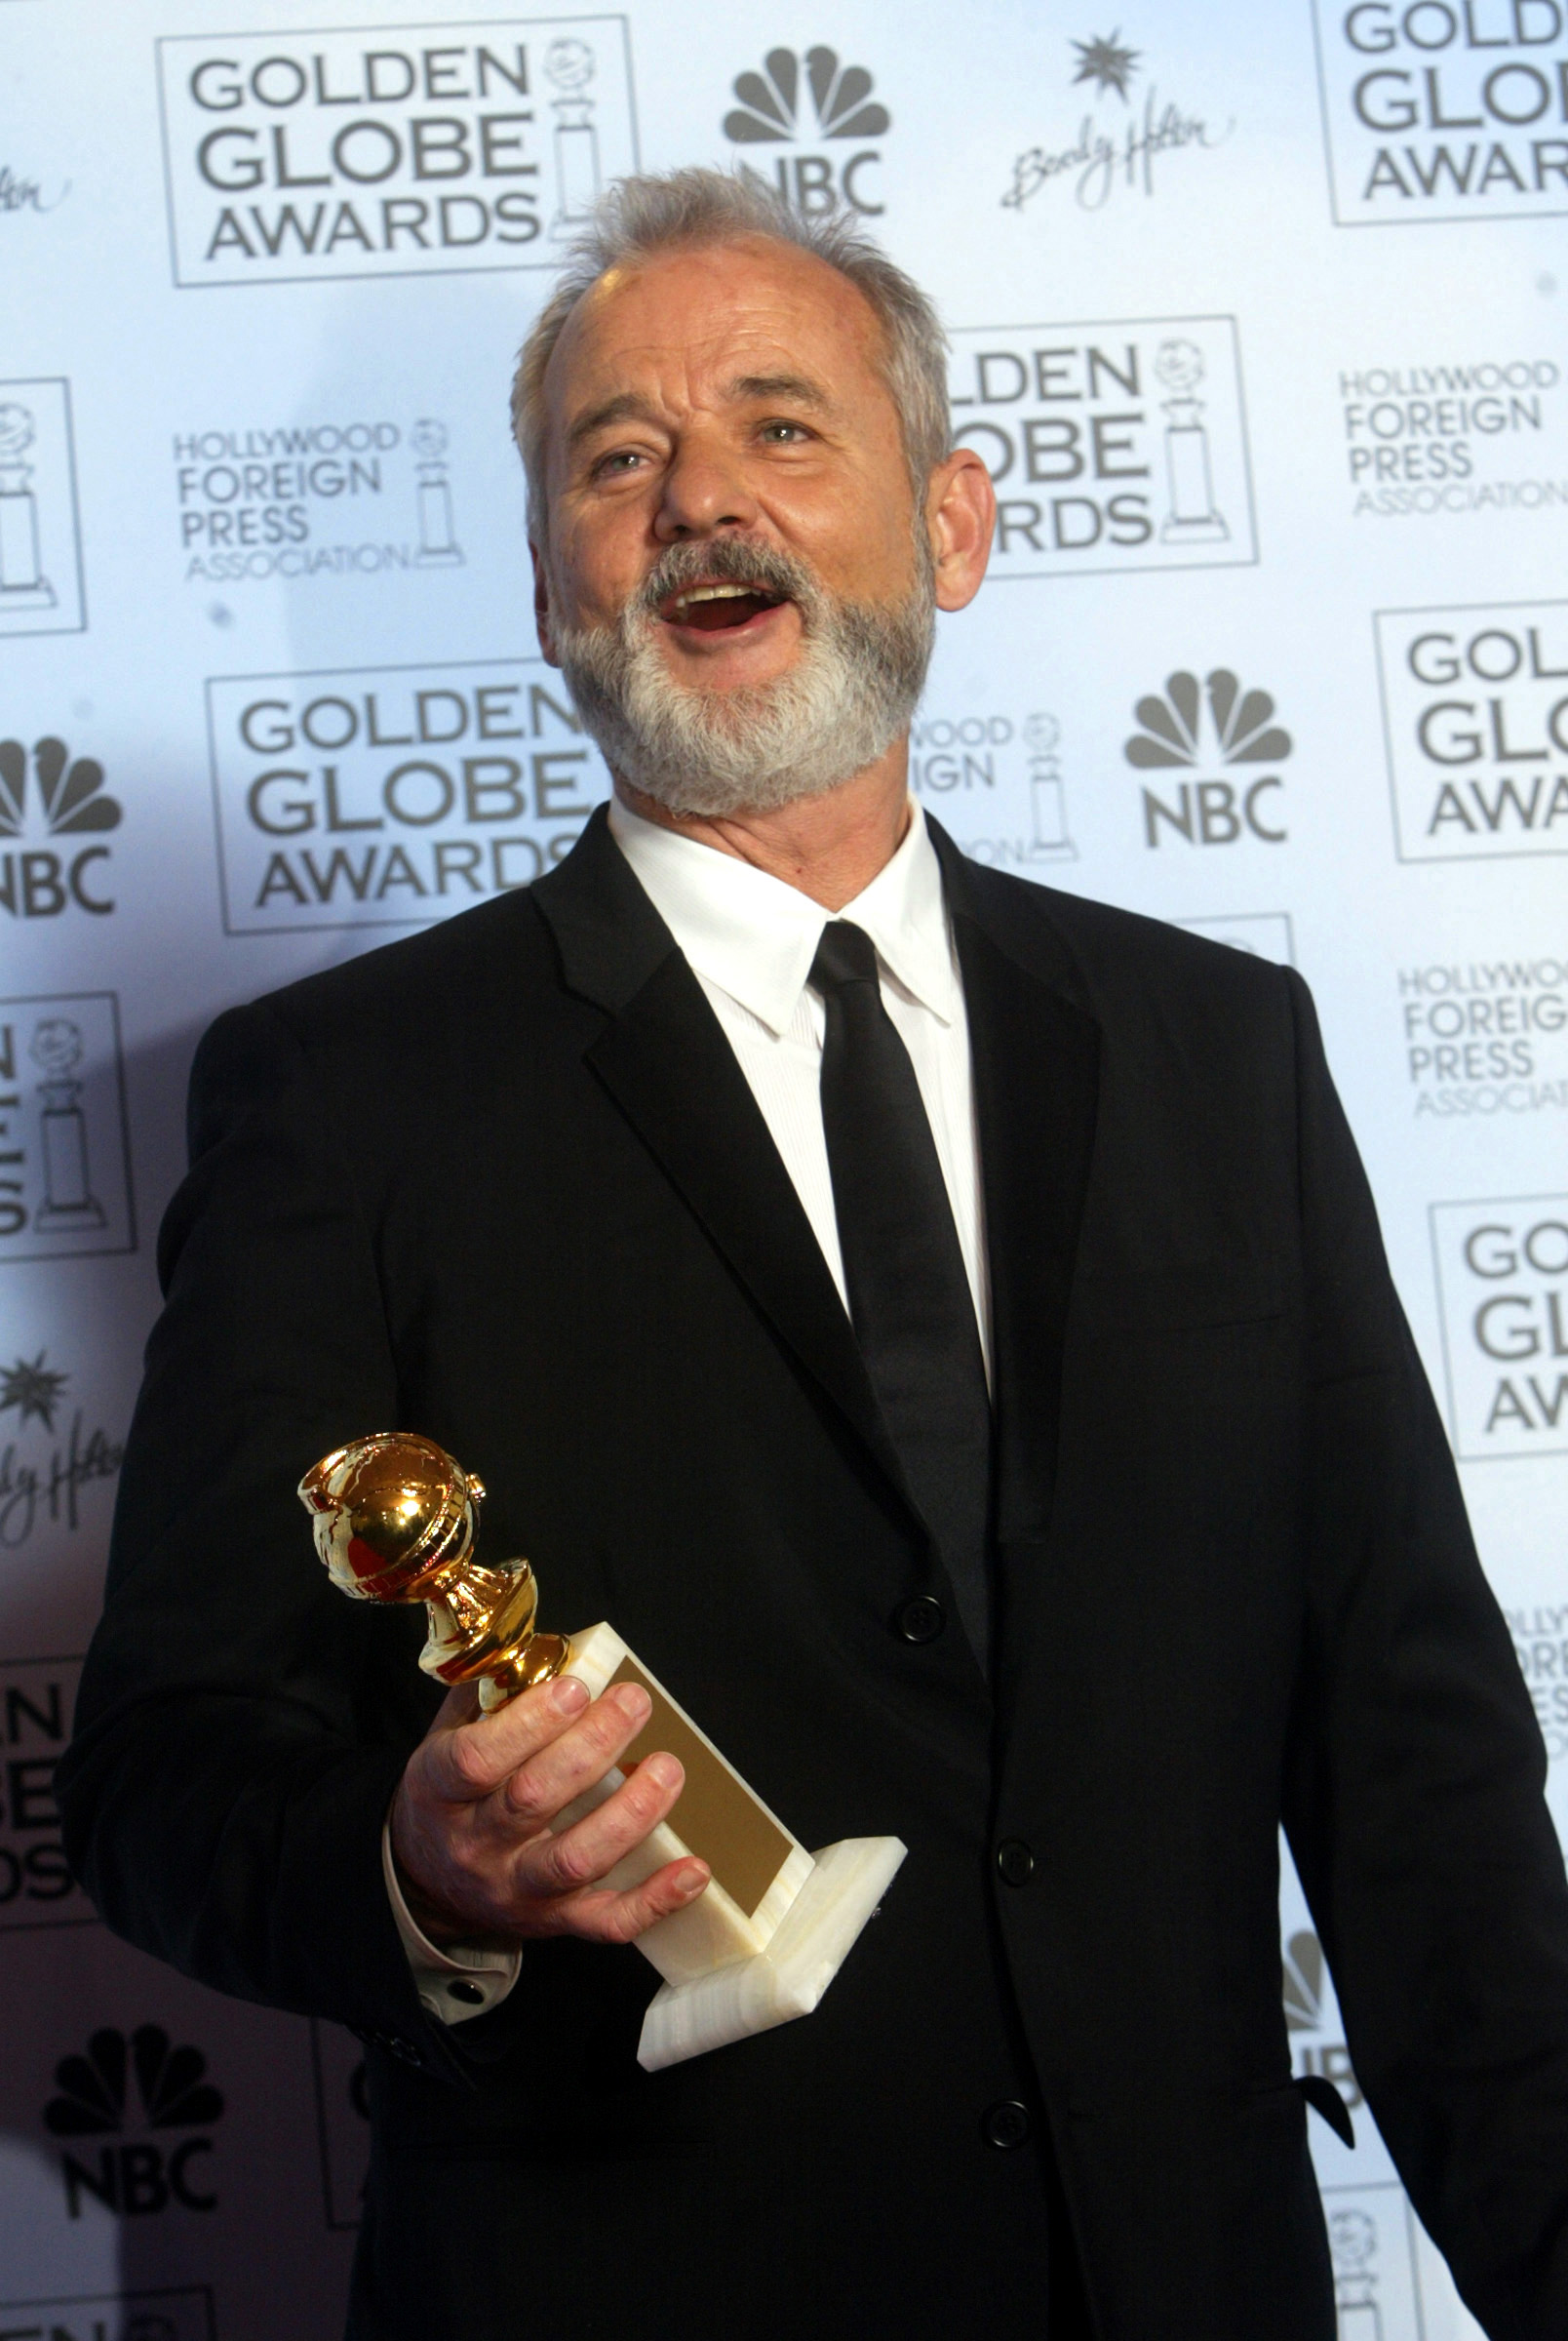 Bill Murray at the 61st Annual Golden Globe Awards on November 24, 2000 in Beverly Hills, California. | Source: Getty Images